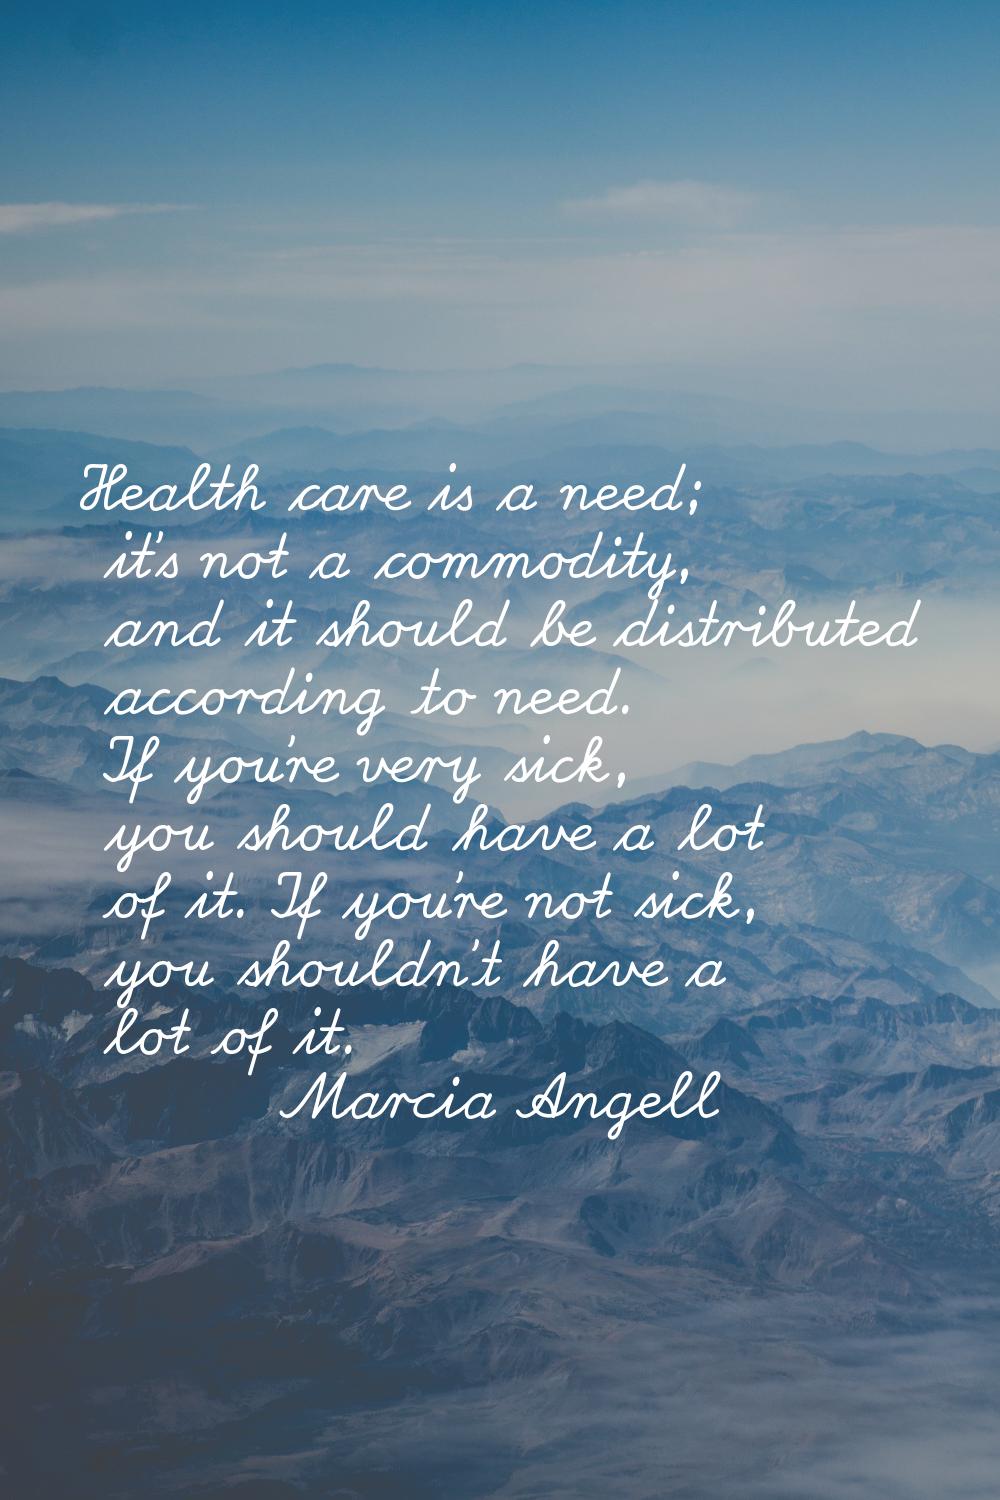 Health care is a need; it's not a commodity, and it should be distributed according to need. If you